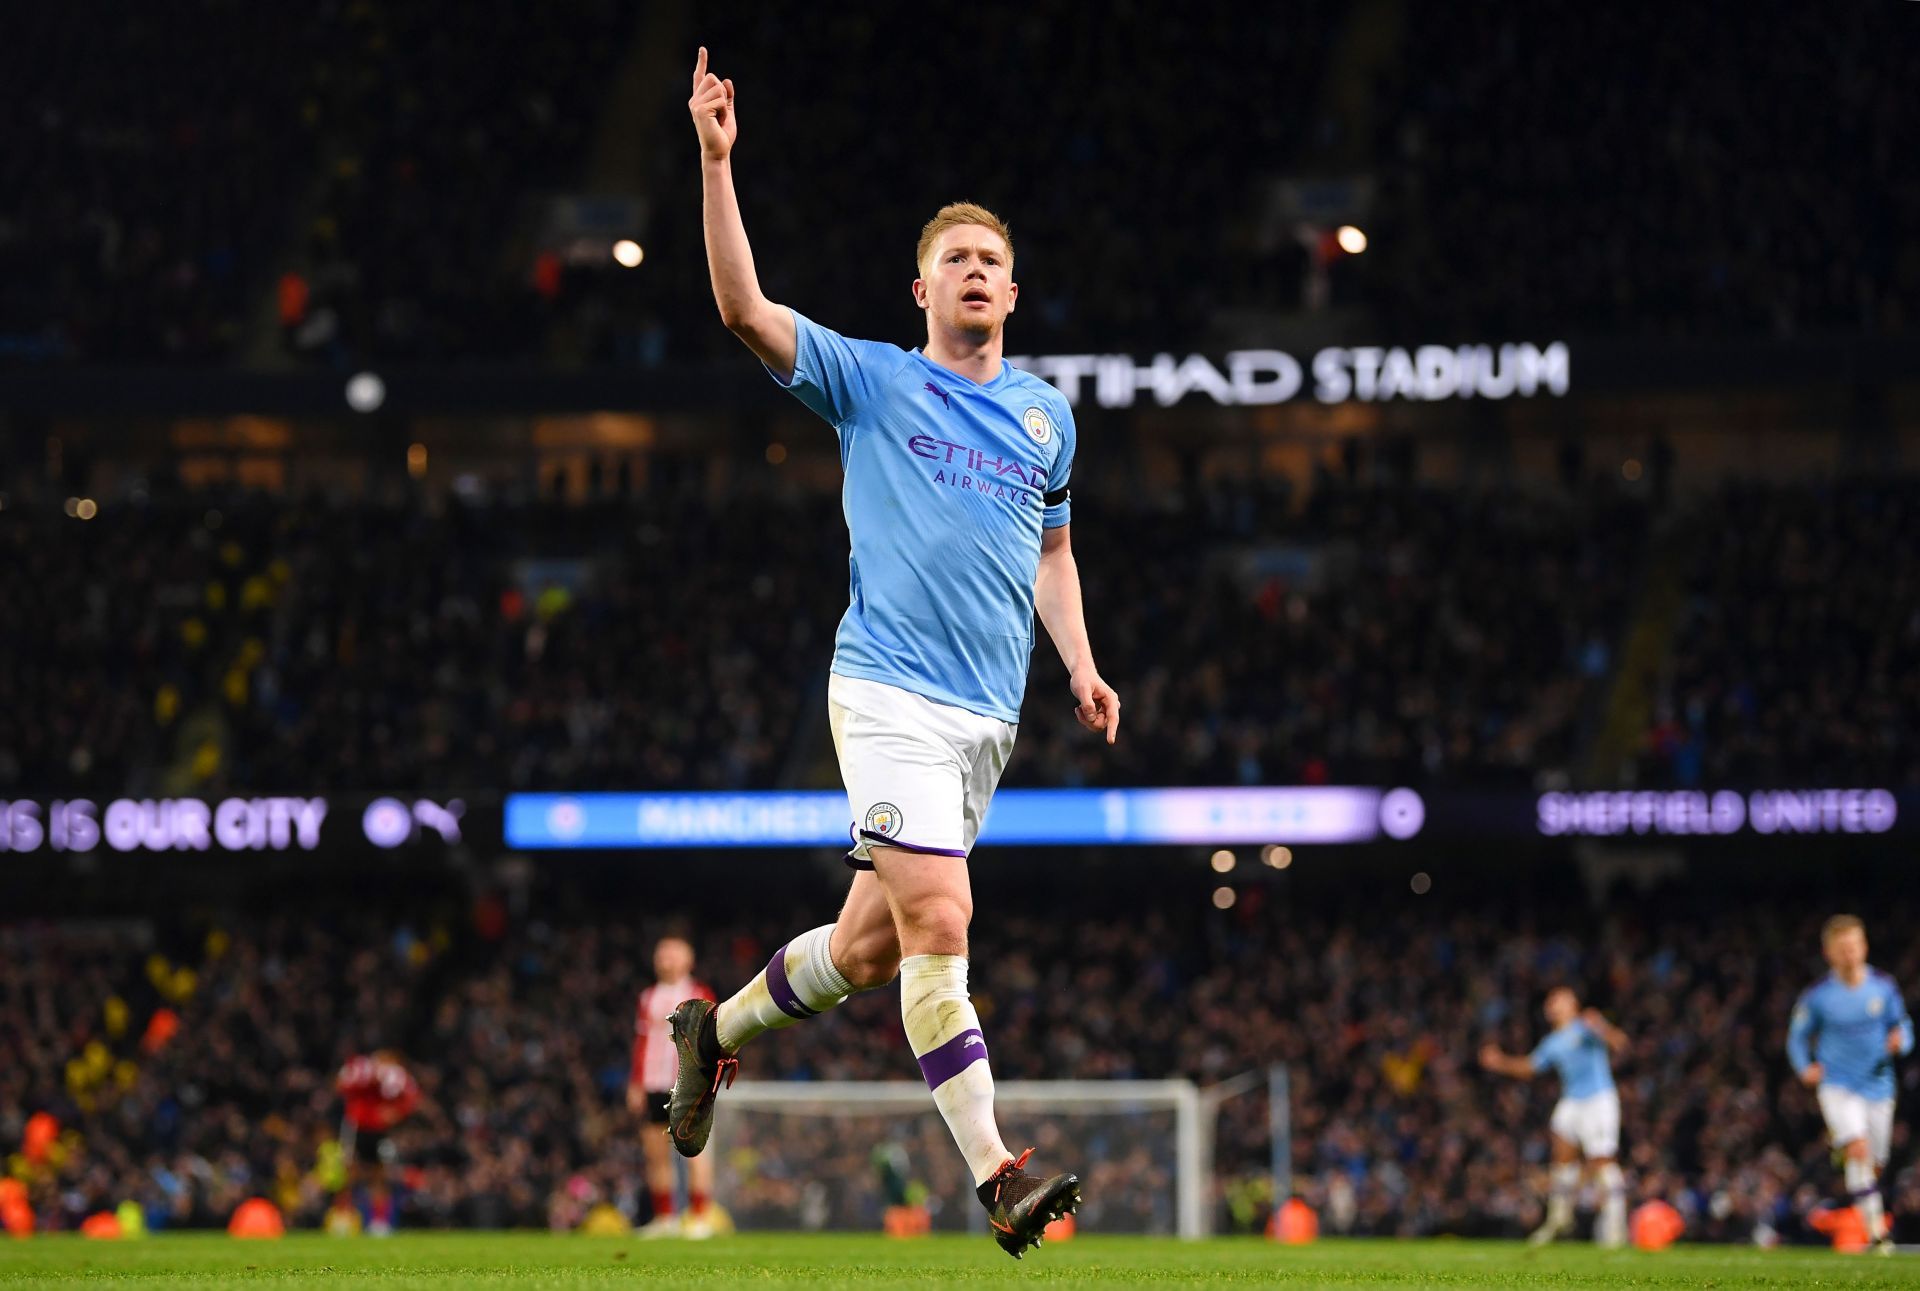 Kevin de Bruyne is one of the best footballers currently